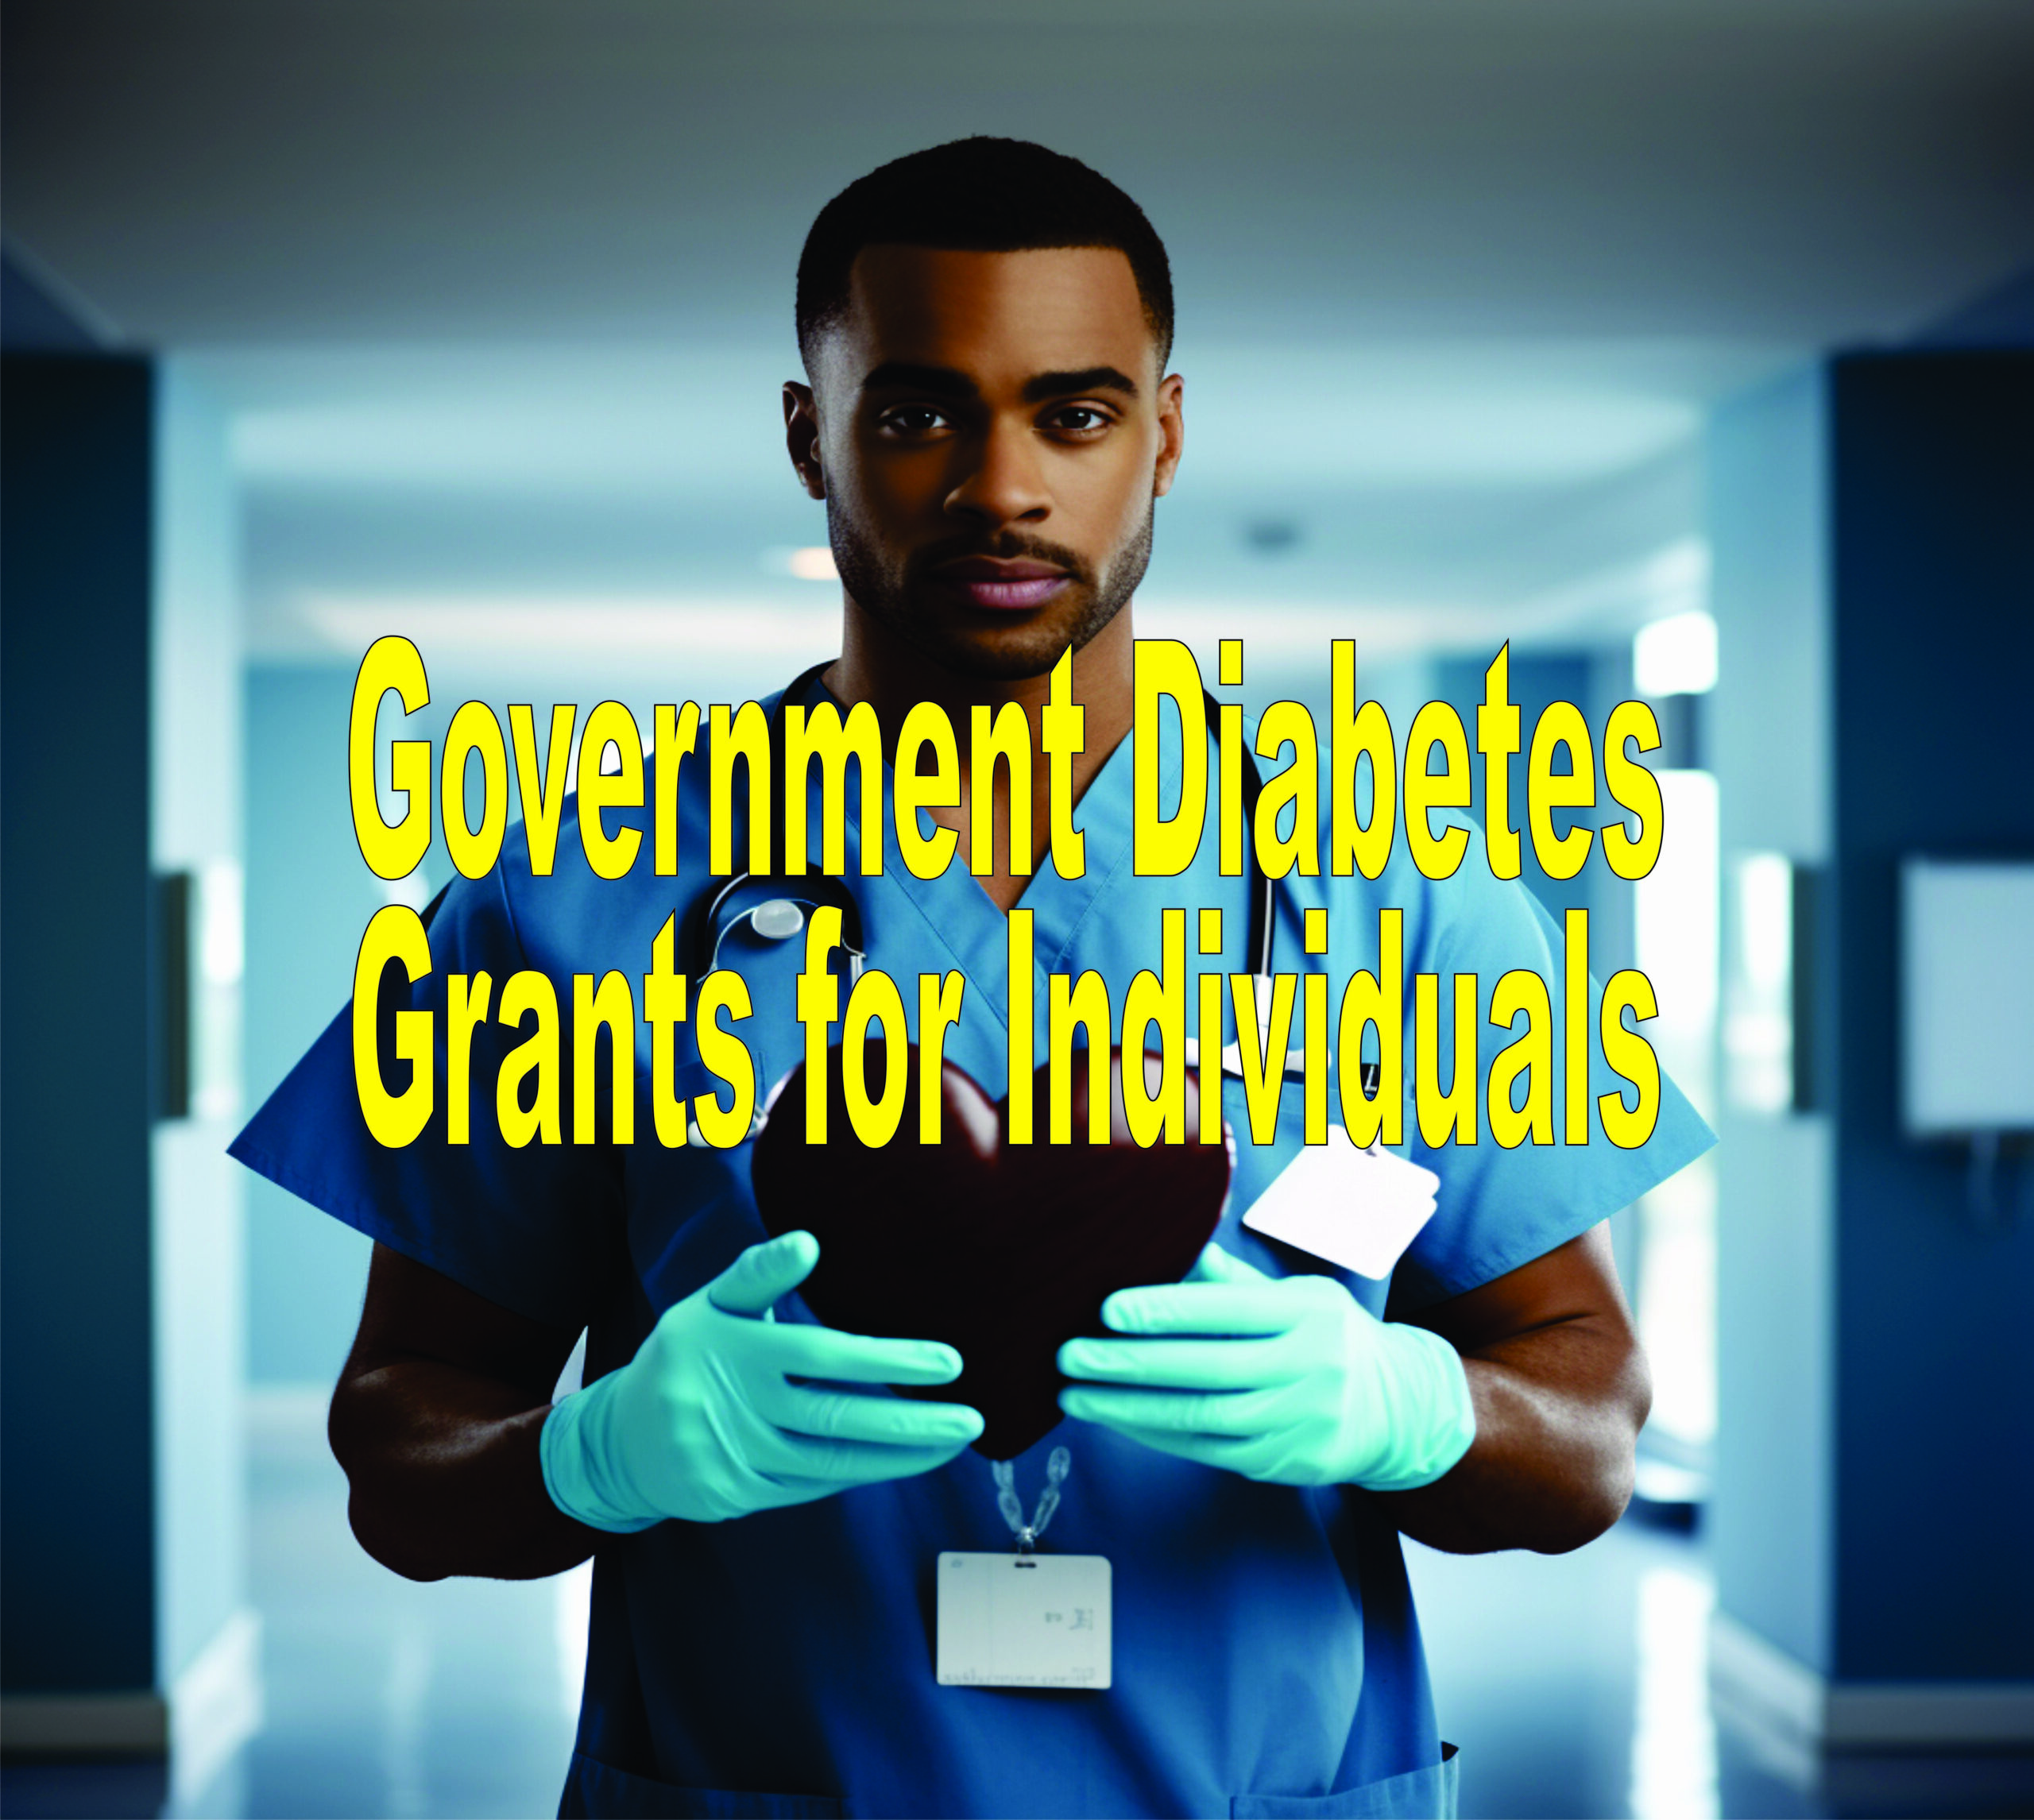 Government Diabetes Grants For Individuals